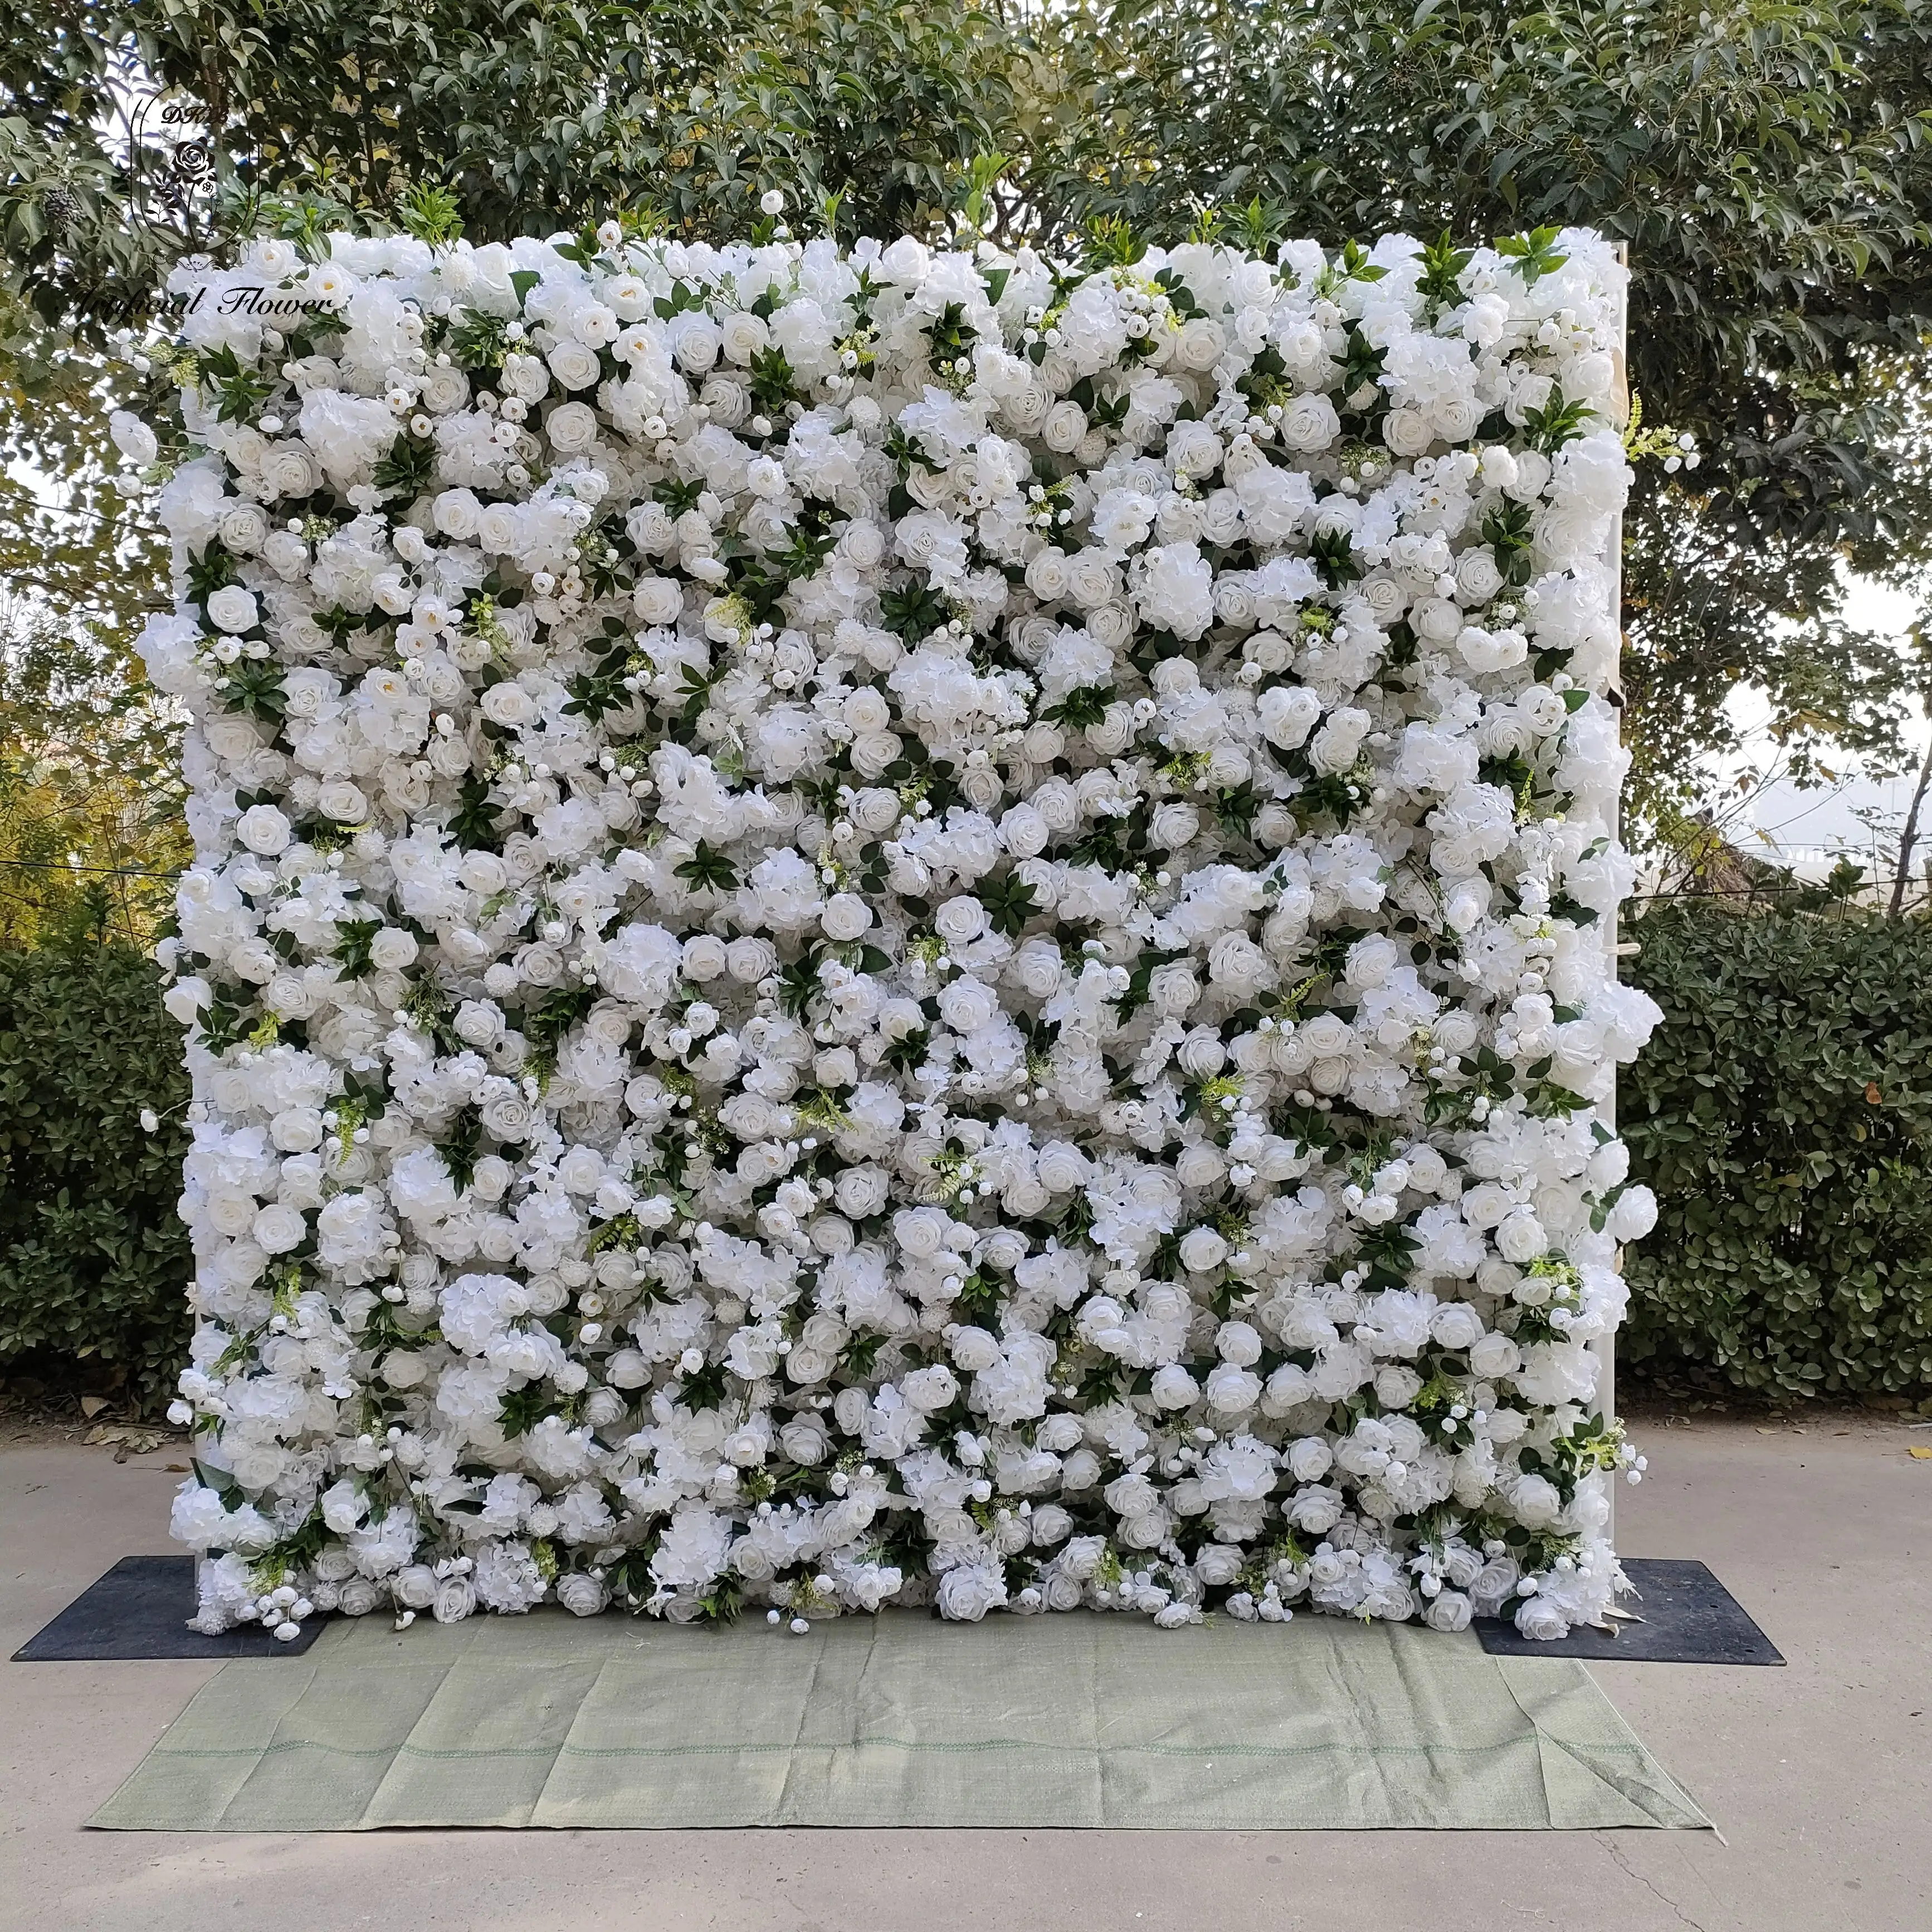 DKB35 years wedding decoration supplies wholesale customized white rose roll up flower wall panel backdrop